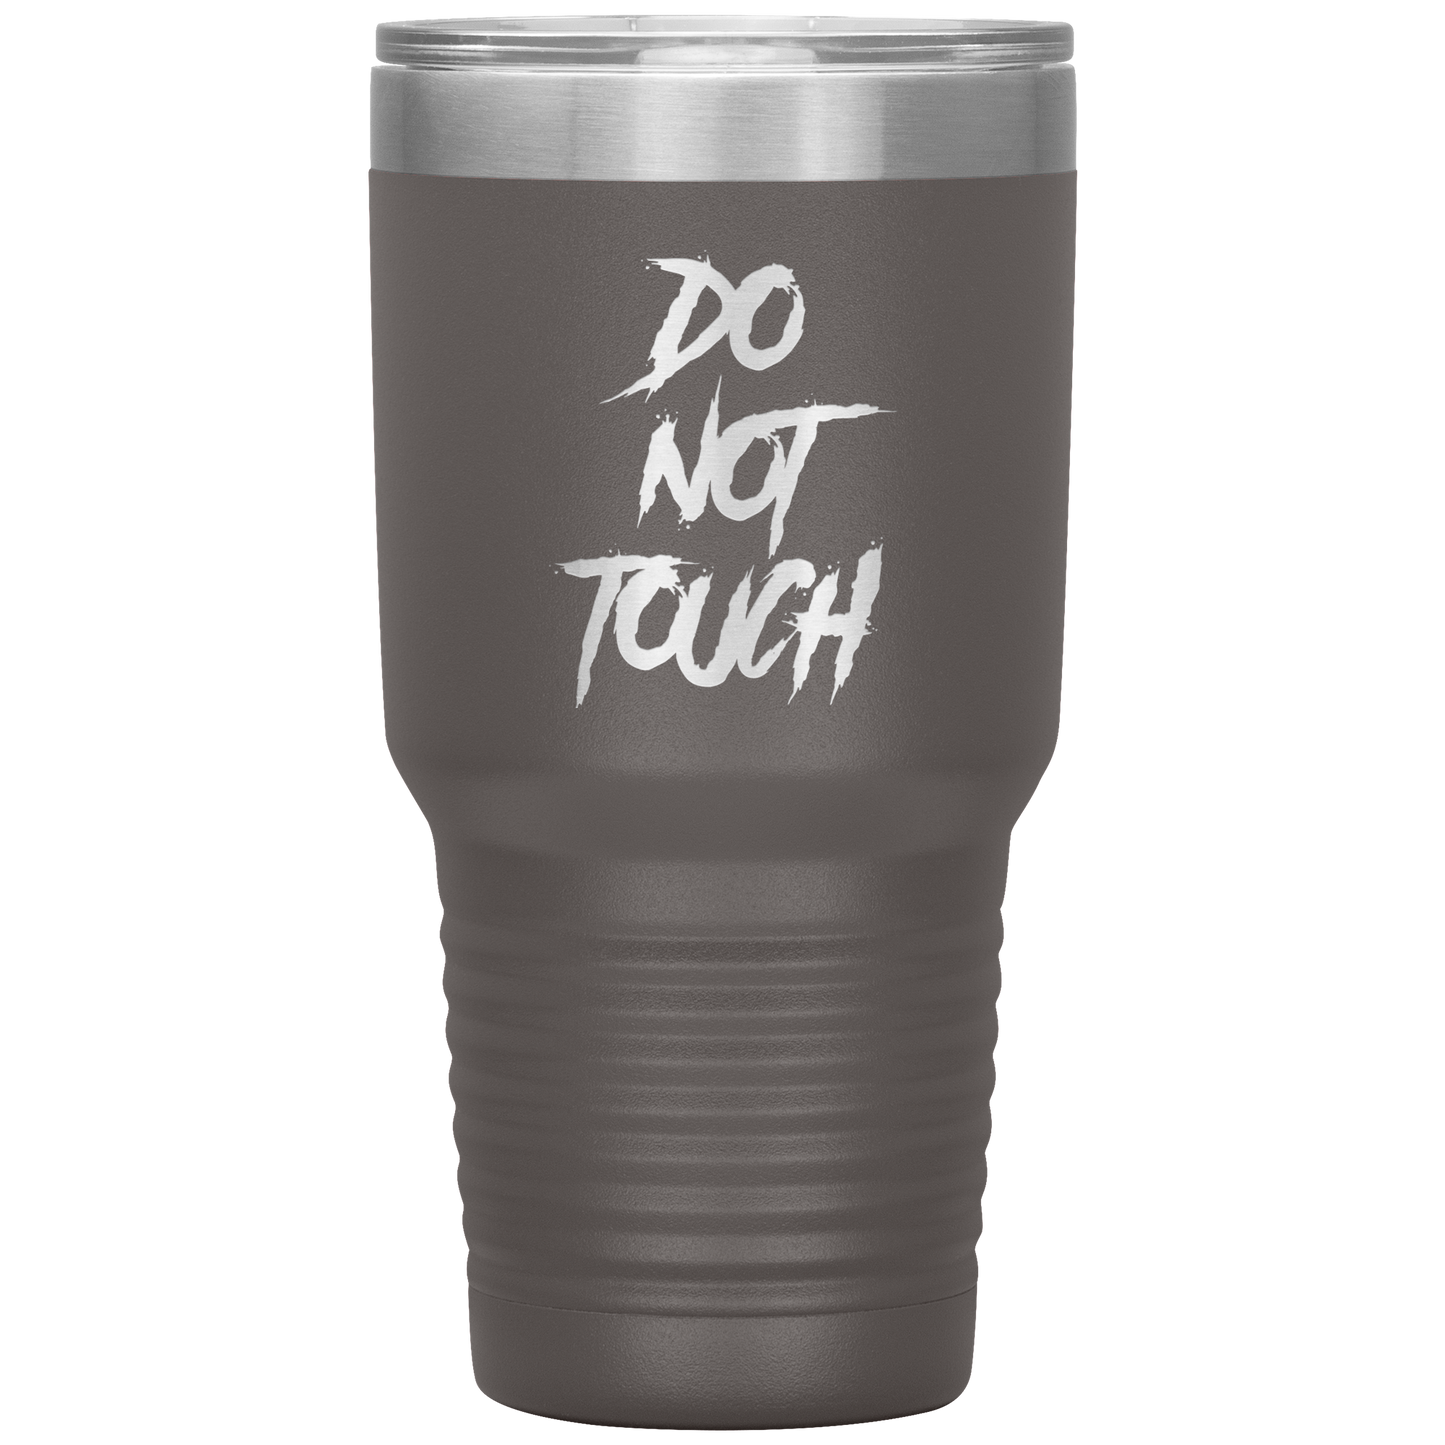 DO NOT TOUCH TUMBLER